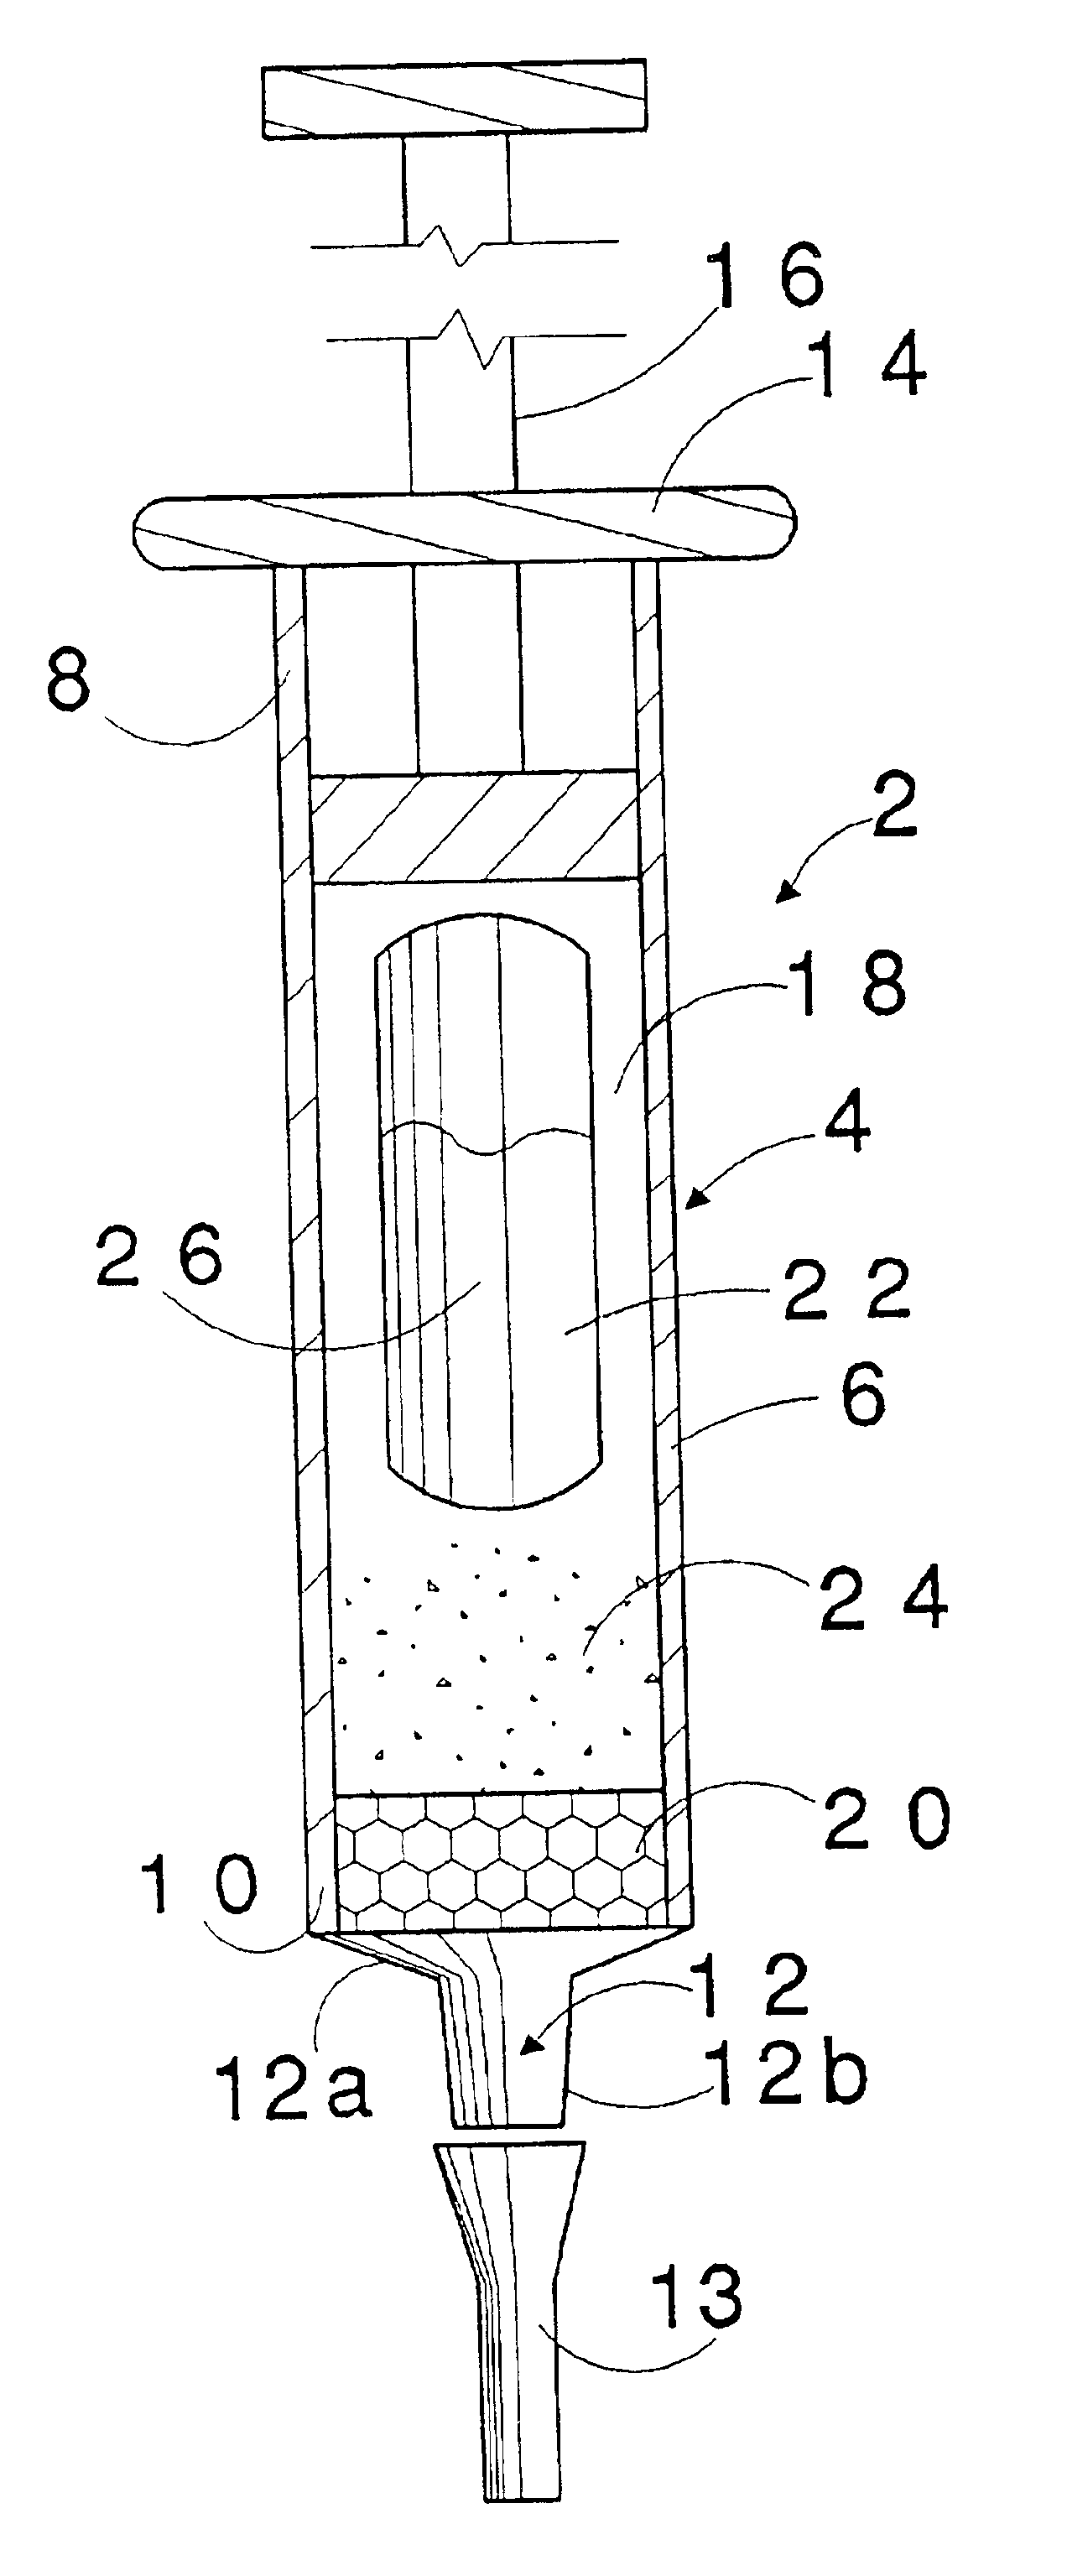 Method for curing cyanoacrylate adhesives